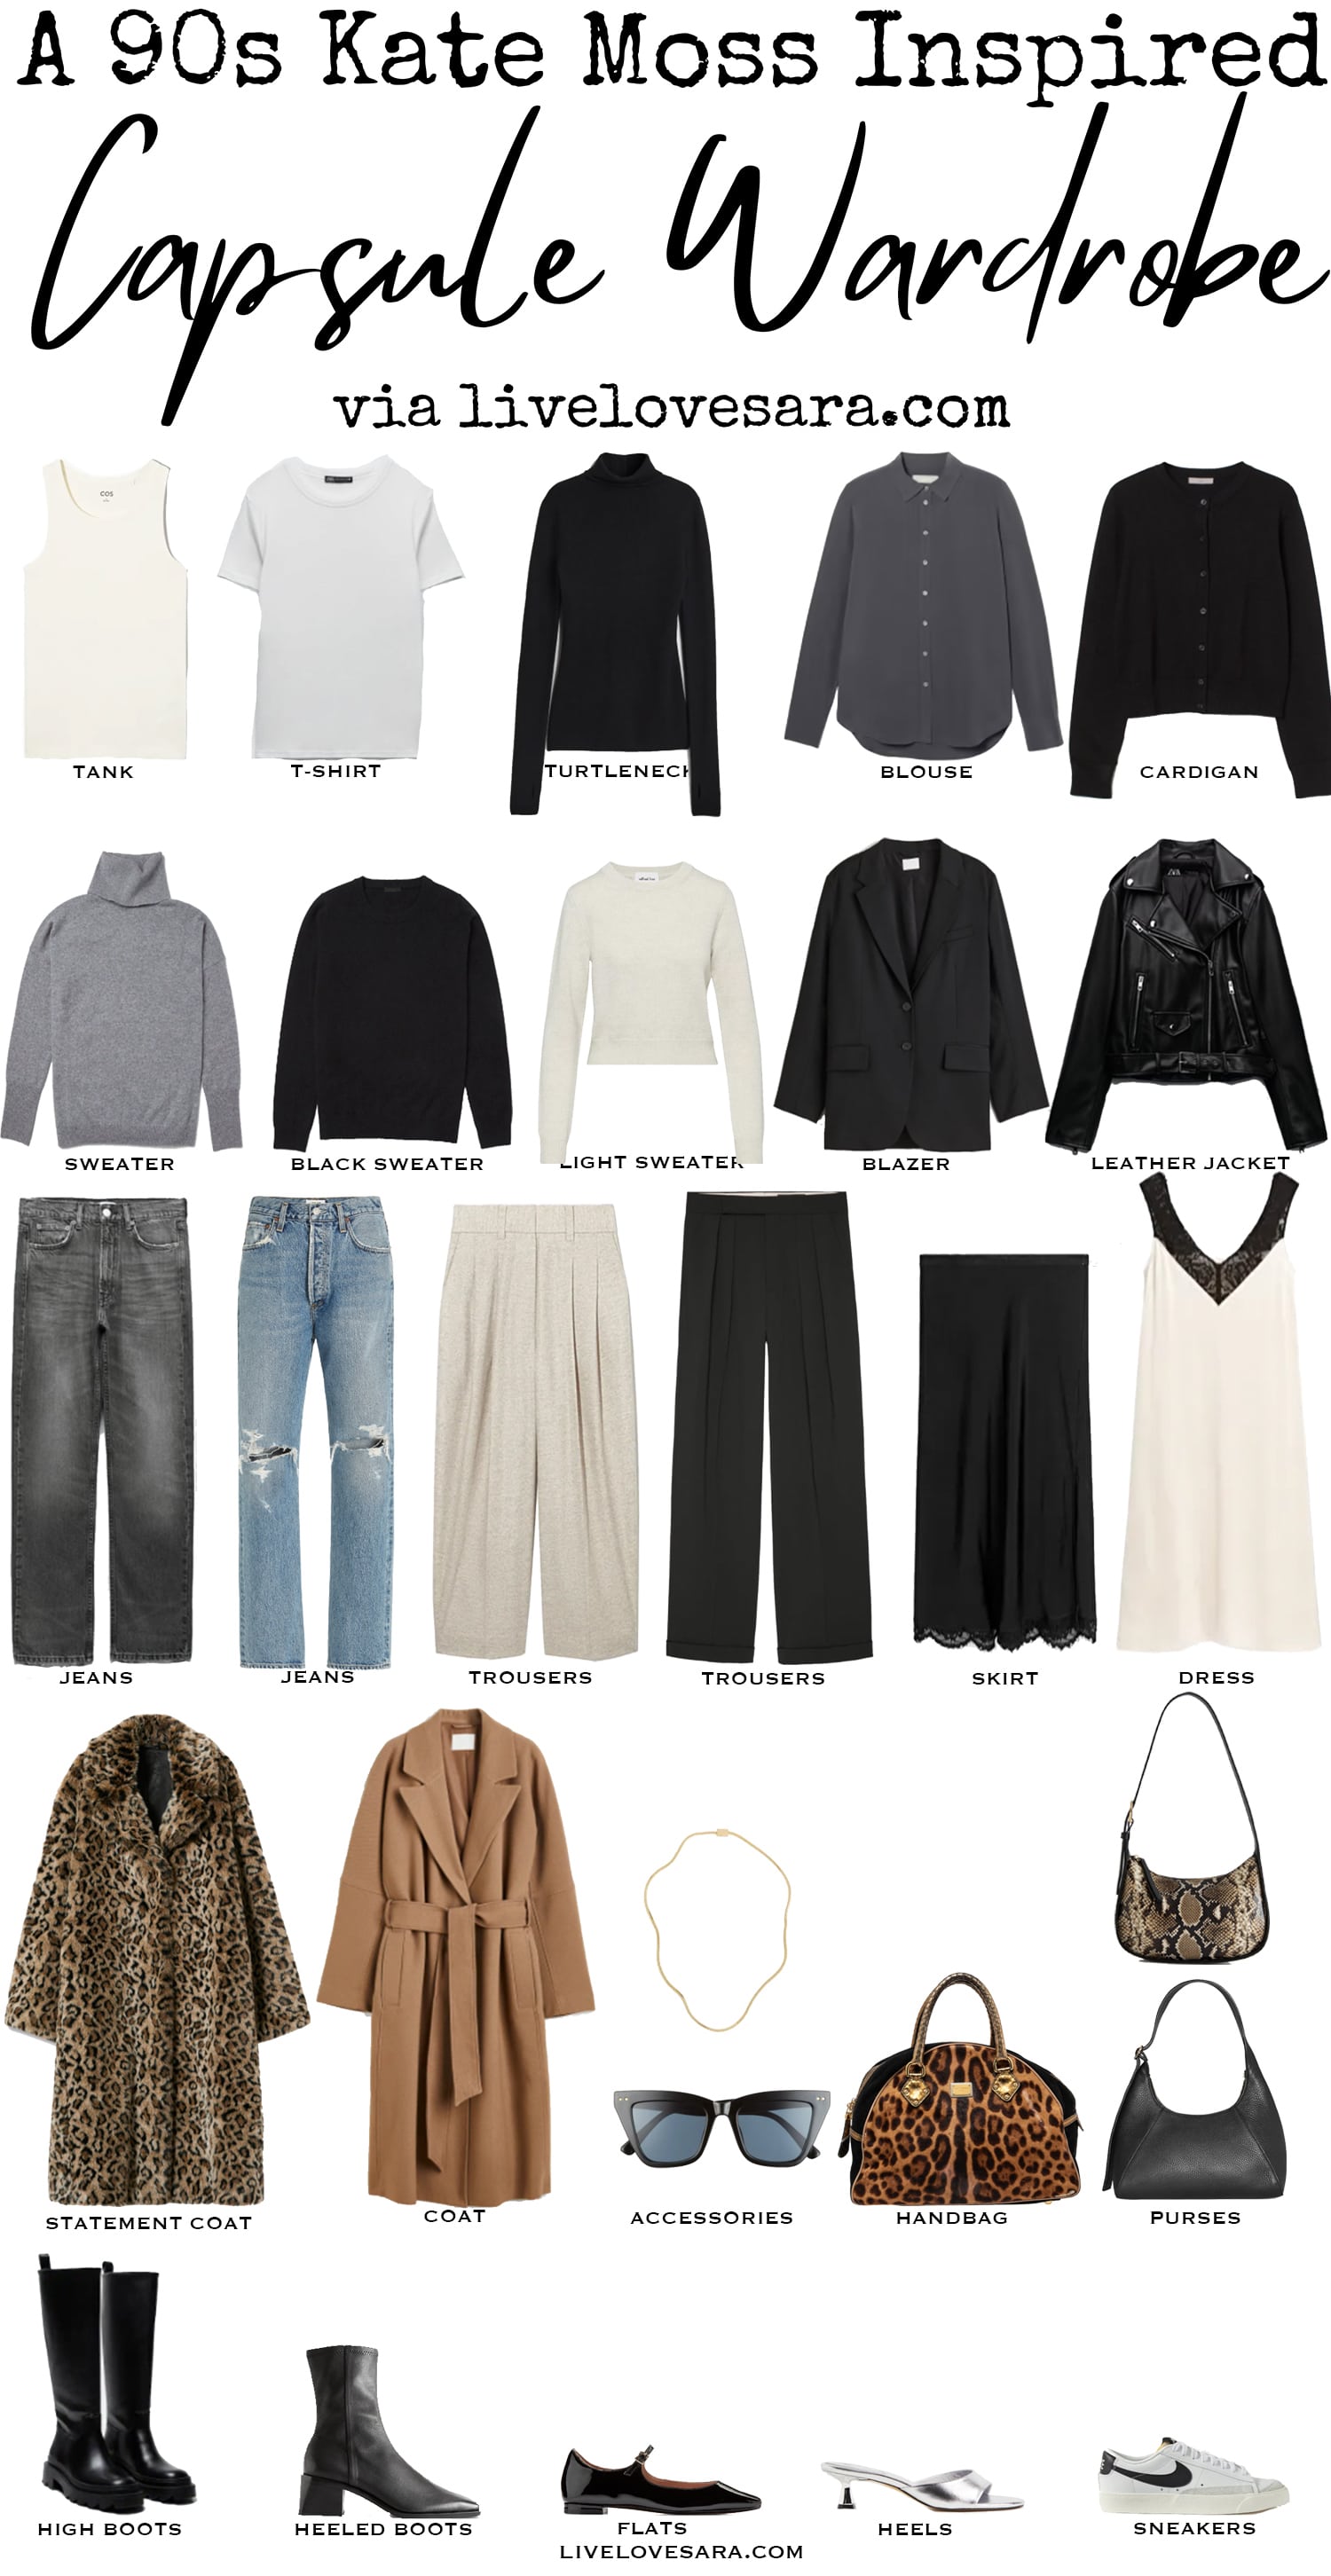 A white background with 28 items for the 90s Kate Moss Capsule Wardrobe